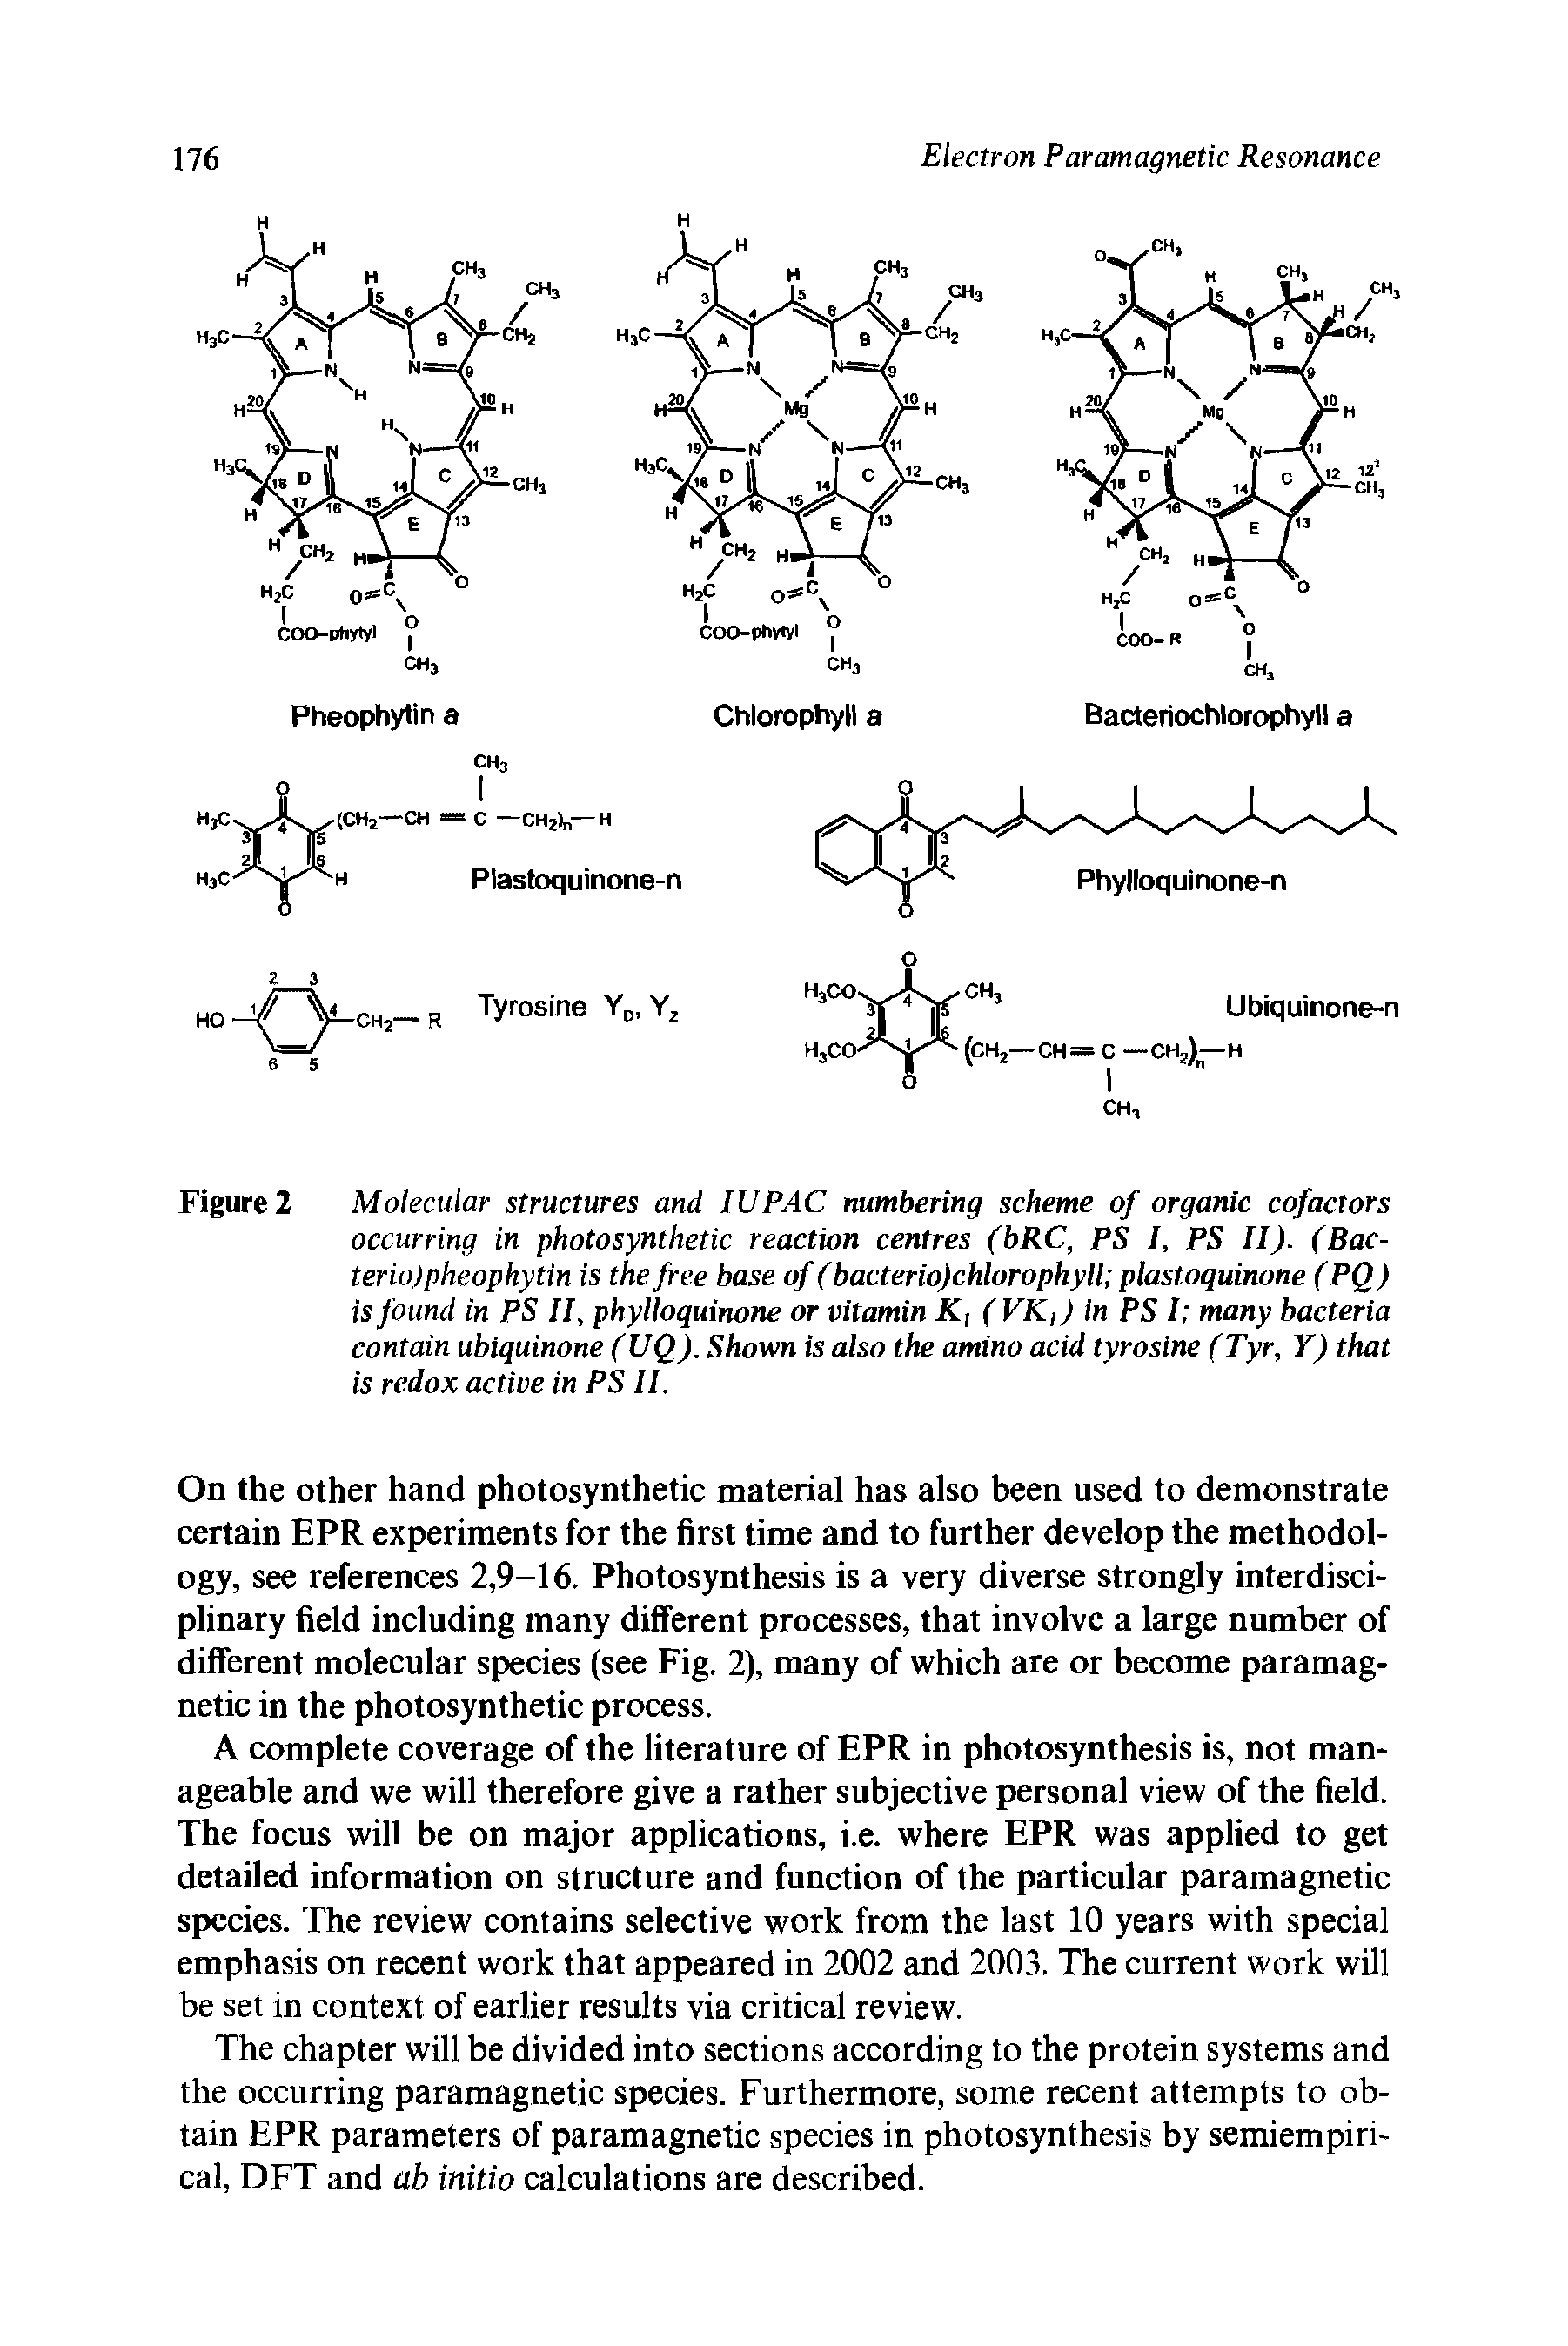 Figure 2 Molecular structures and IUPAC numbering scheme of organic cofactors occurring in photosynthetic reaction centres (bRC, PS I, PS II). (Bac-teriolpheophytin is the free base of (bacterio)chlorophyll plastoquinone (PQ) is found in PS If phylloquinone or vitamin K, ( VK,) in PS I many bacteria contain ubiquinone (UQ). Shown is also the amino acid tyrosine (Tyr, Y) that is redox active in PS II.